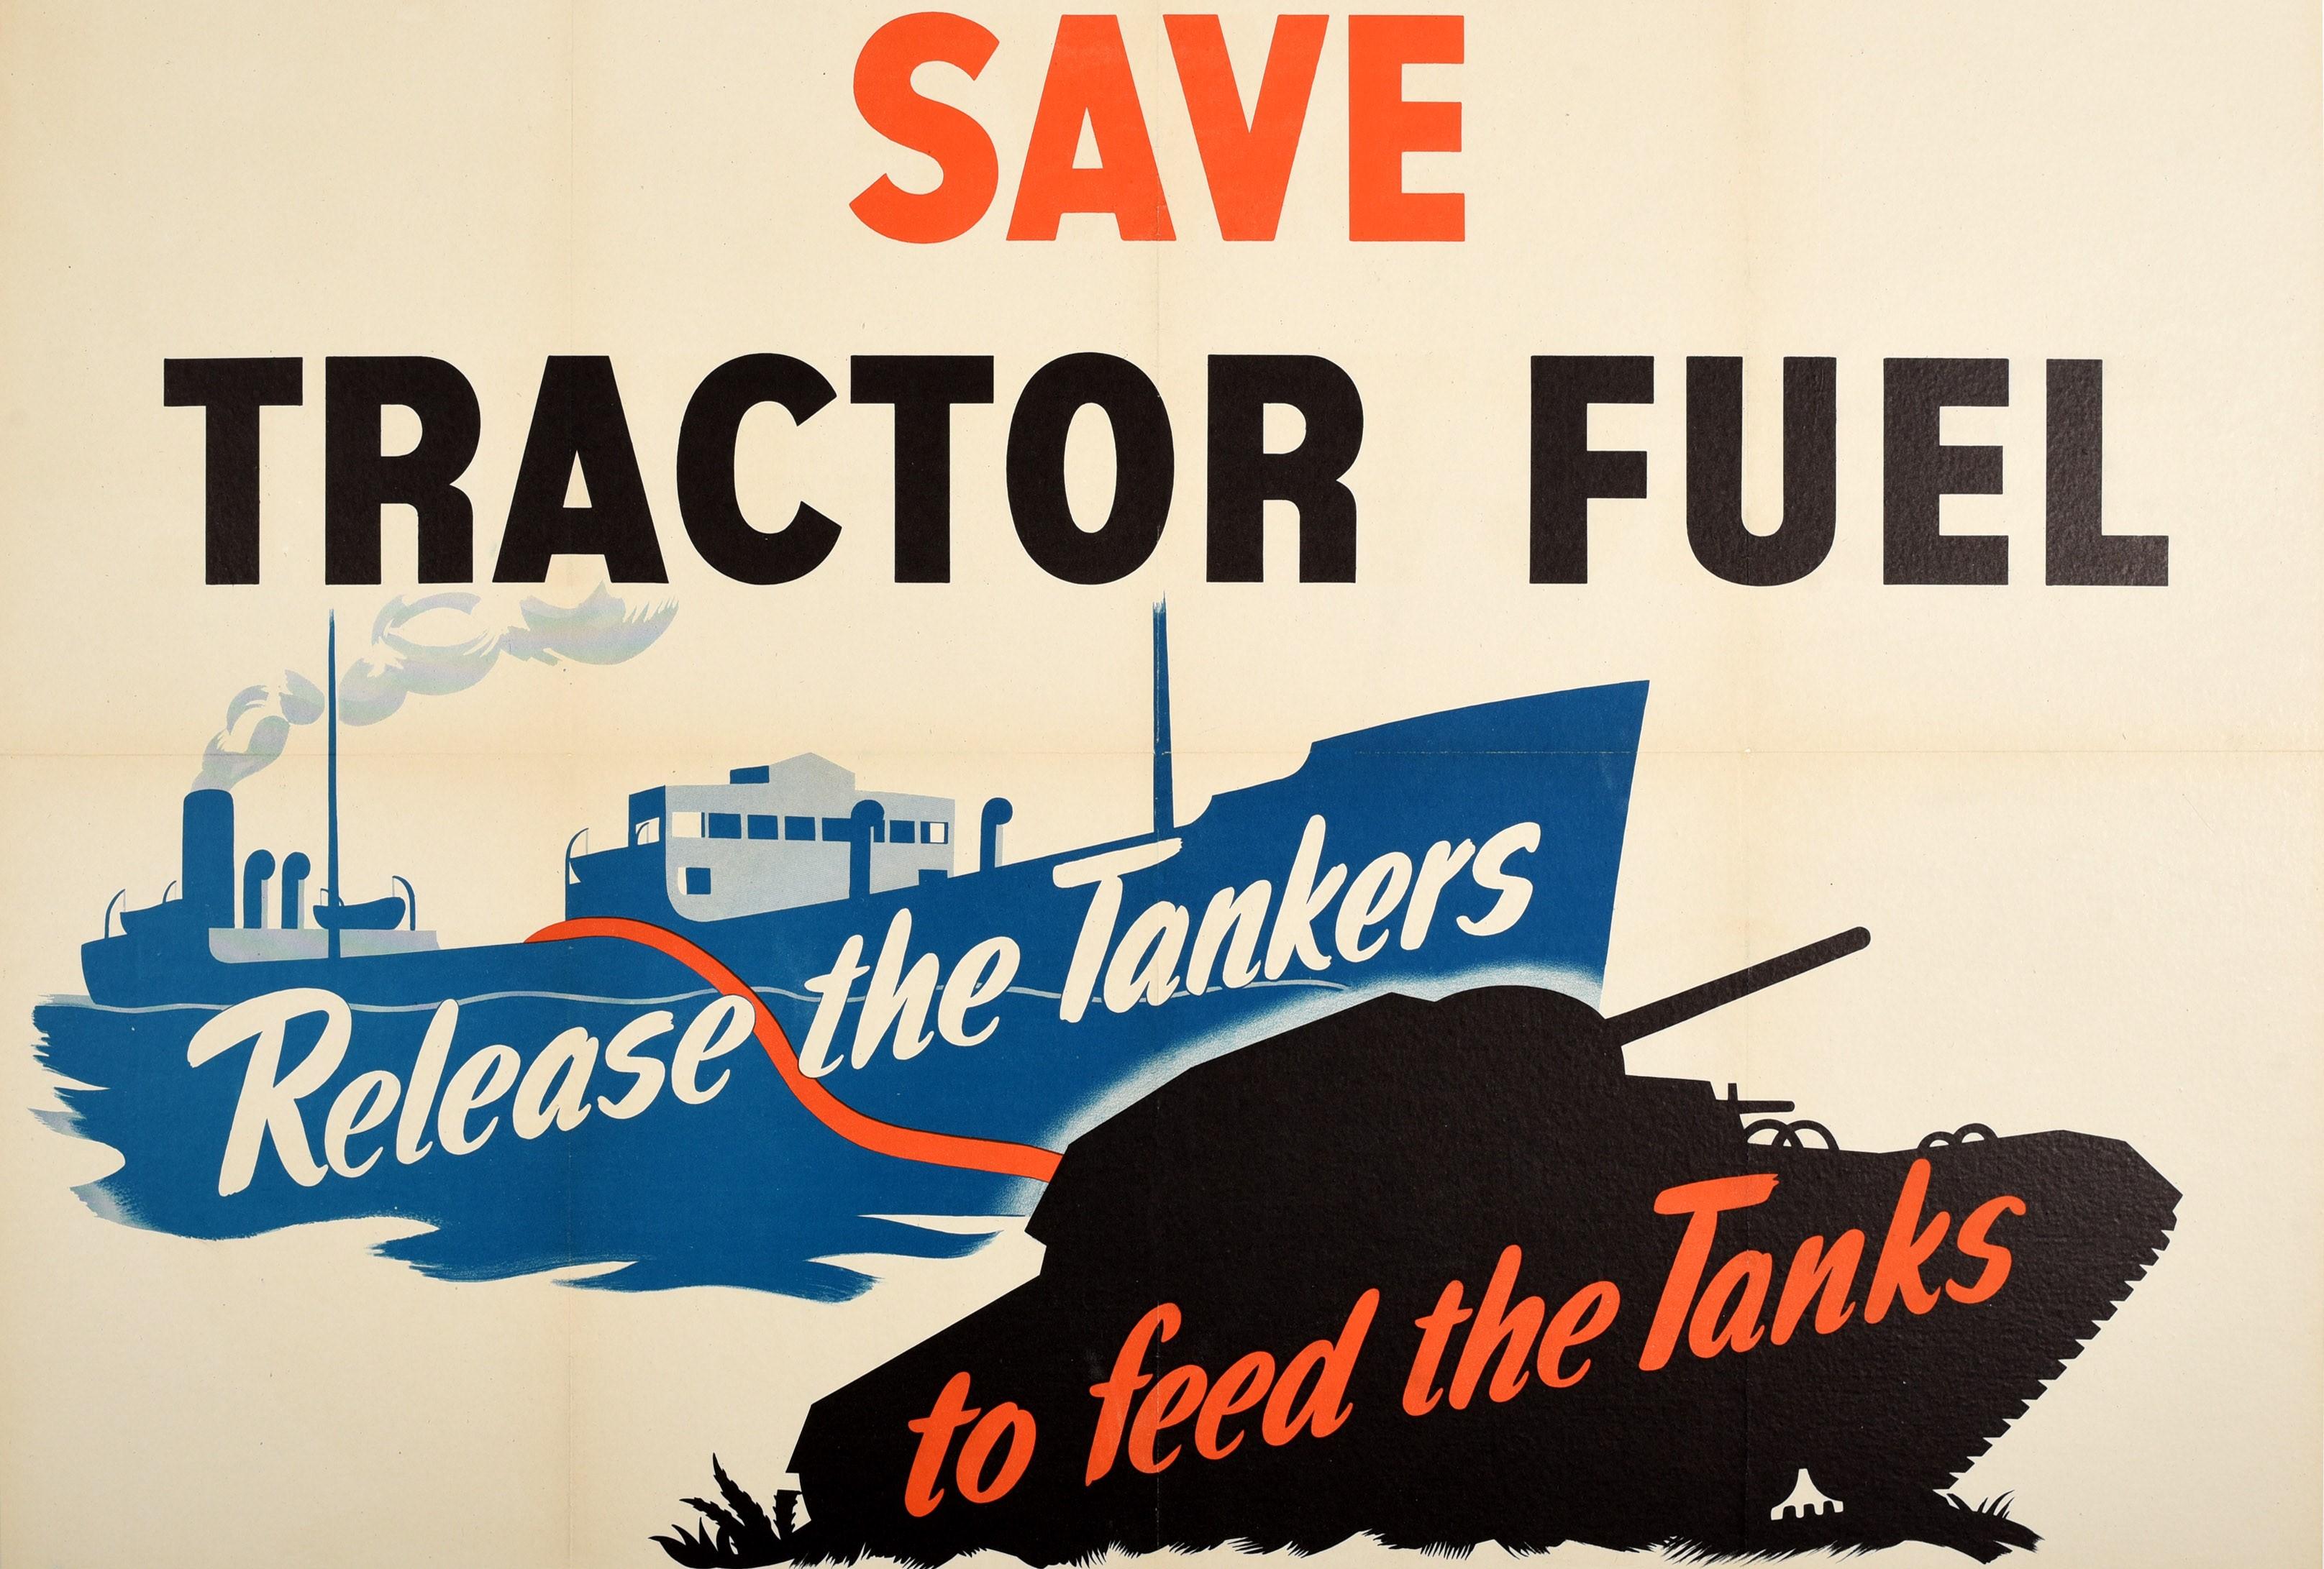 Original vintage World War Two home front poster - Save tractor fuel Release the Tankers to feed the Tanks - featuring the bold text above and over an image of a tanker ship and silhouette of a military tank with a pipe line joining them. Printed